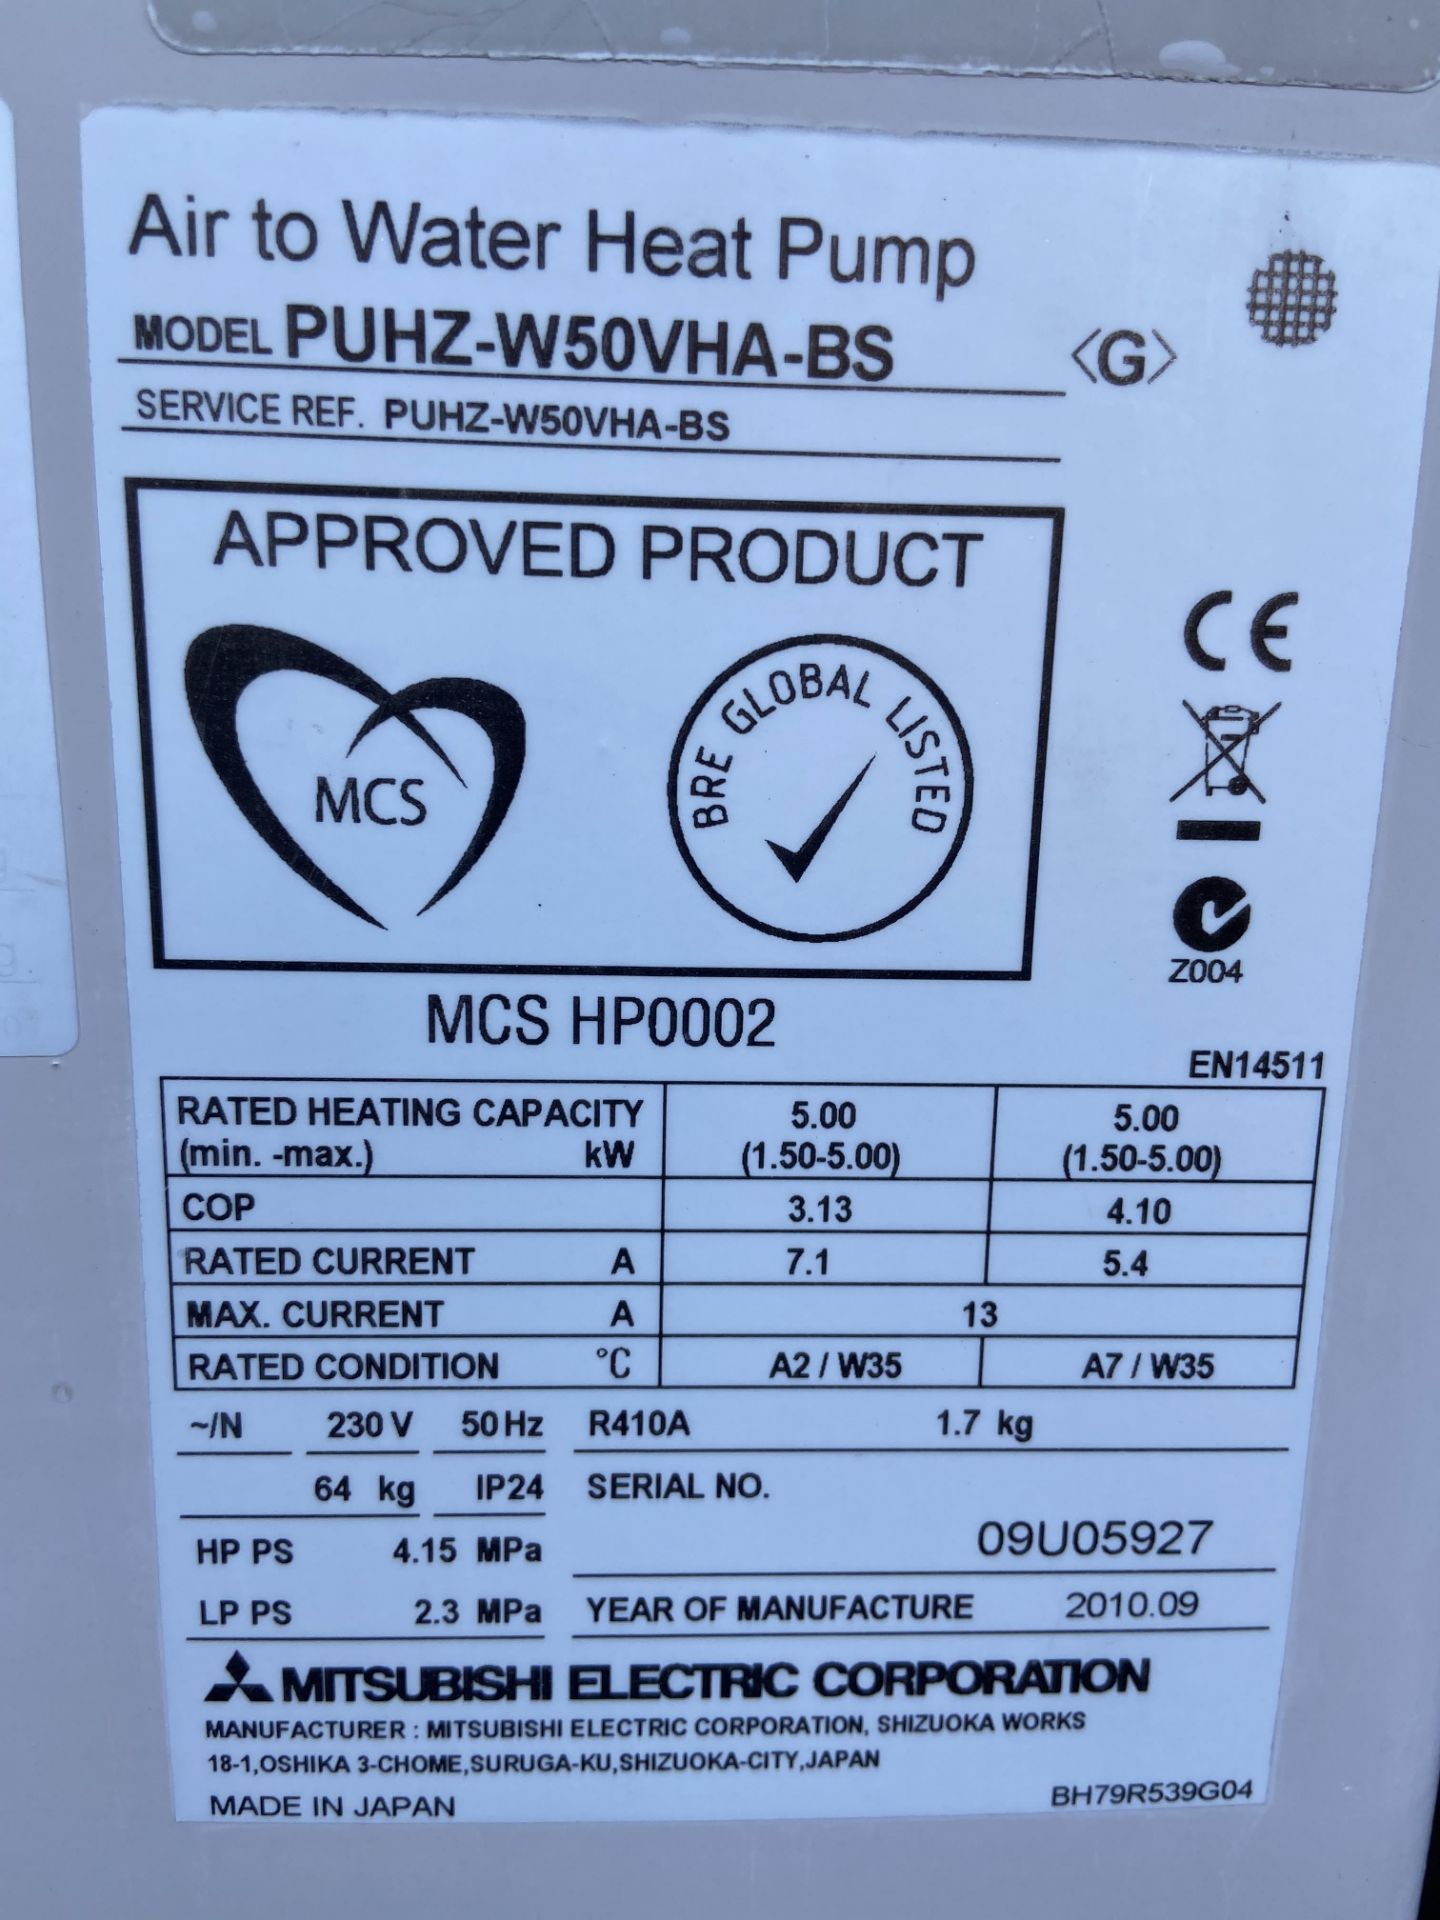 Mitsubishi air to water heat pump, Model. PUHZ-W50VHA-BS (2010) - Located outside Hydrotherapy - Image 2 of 3